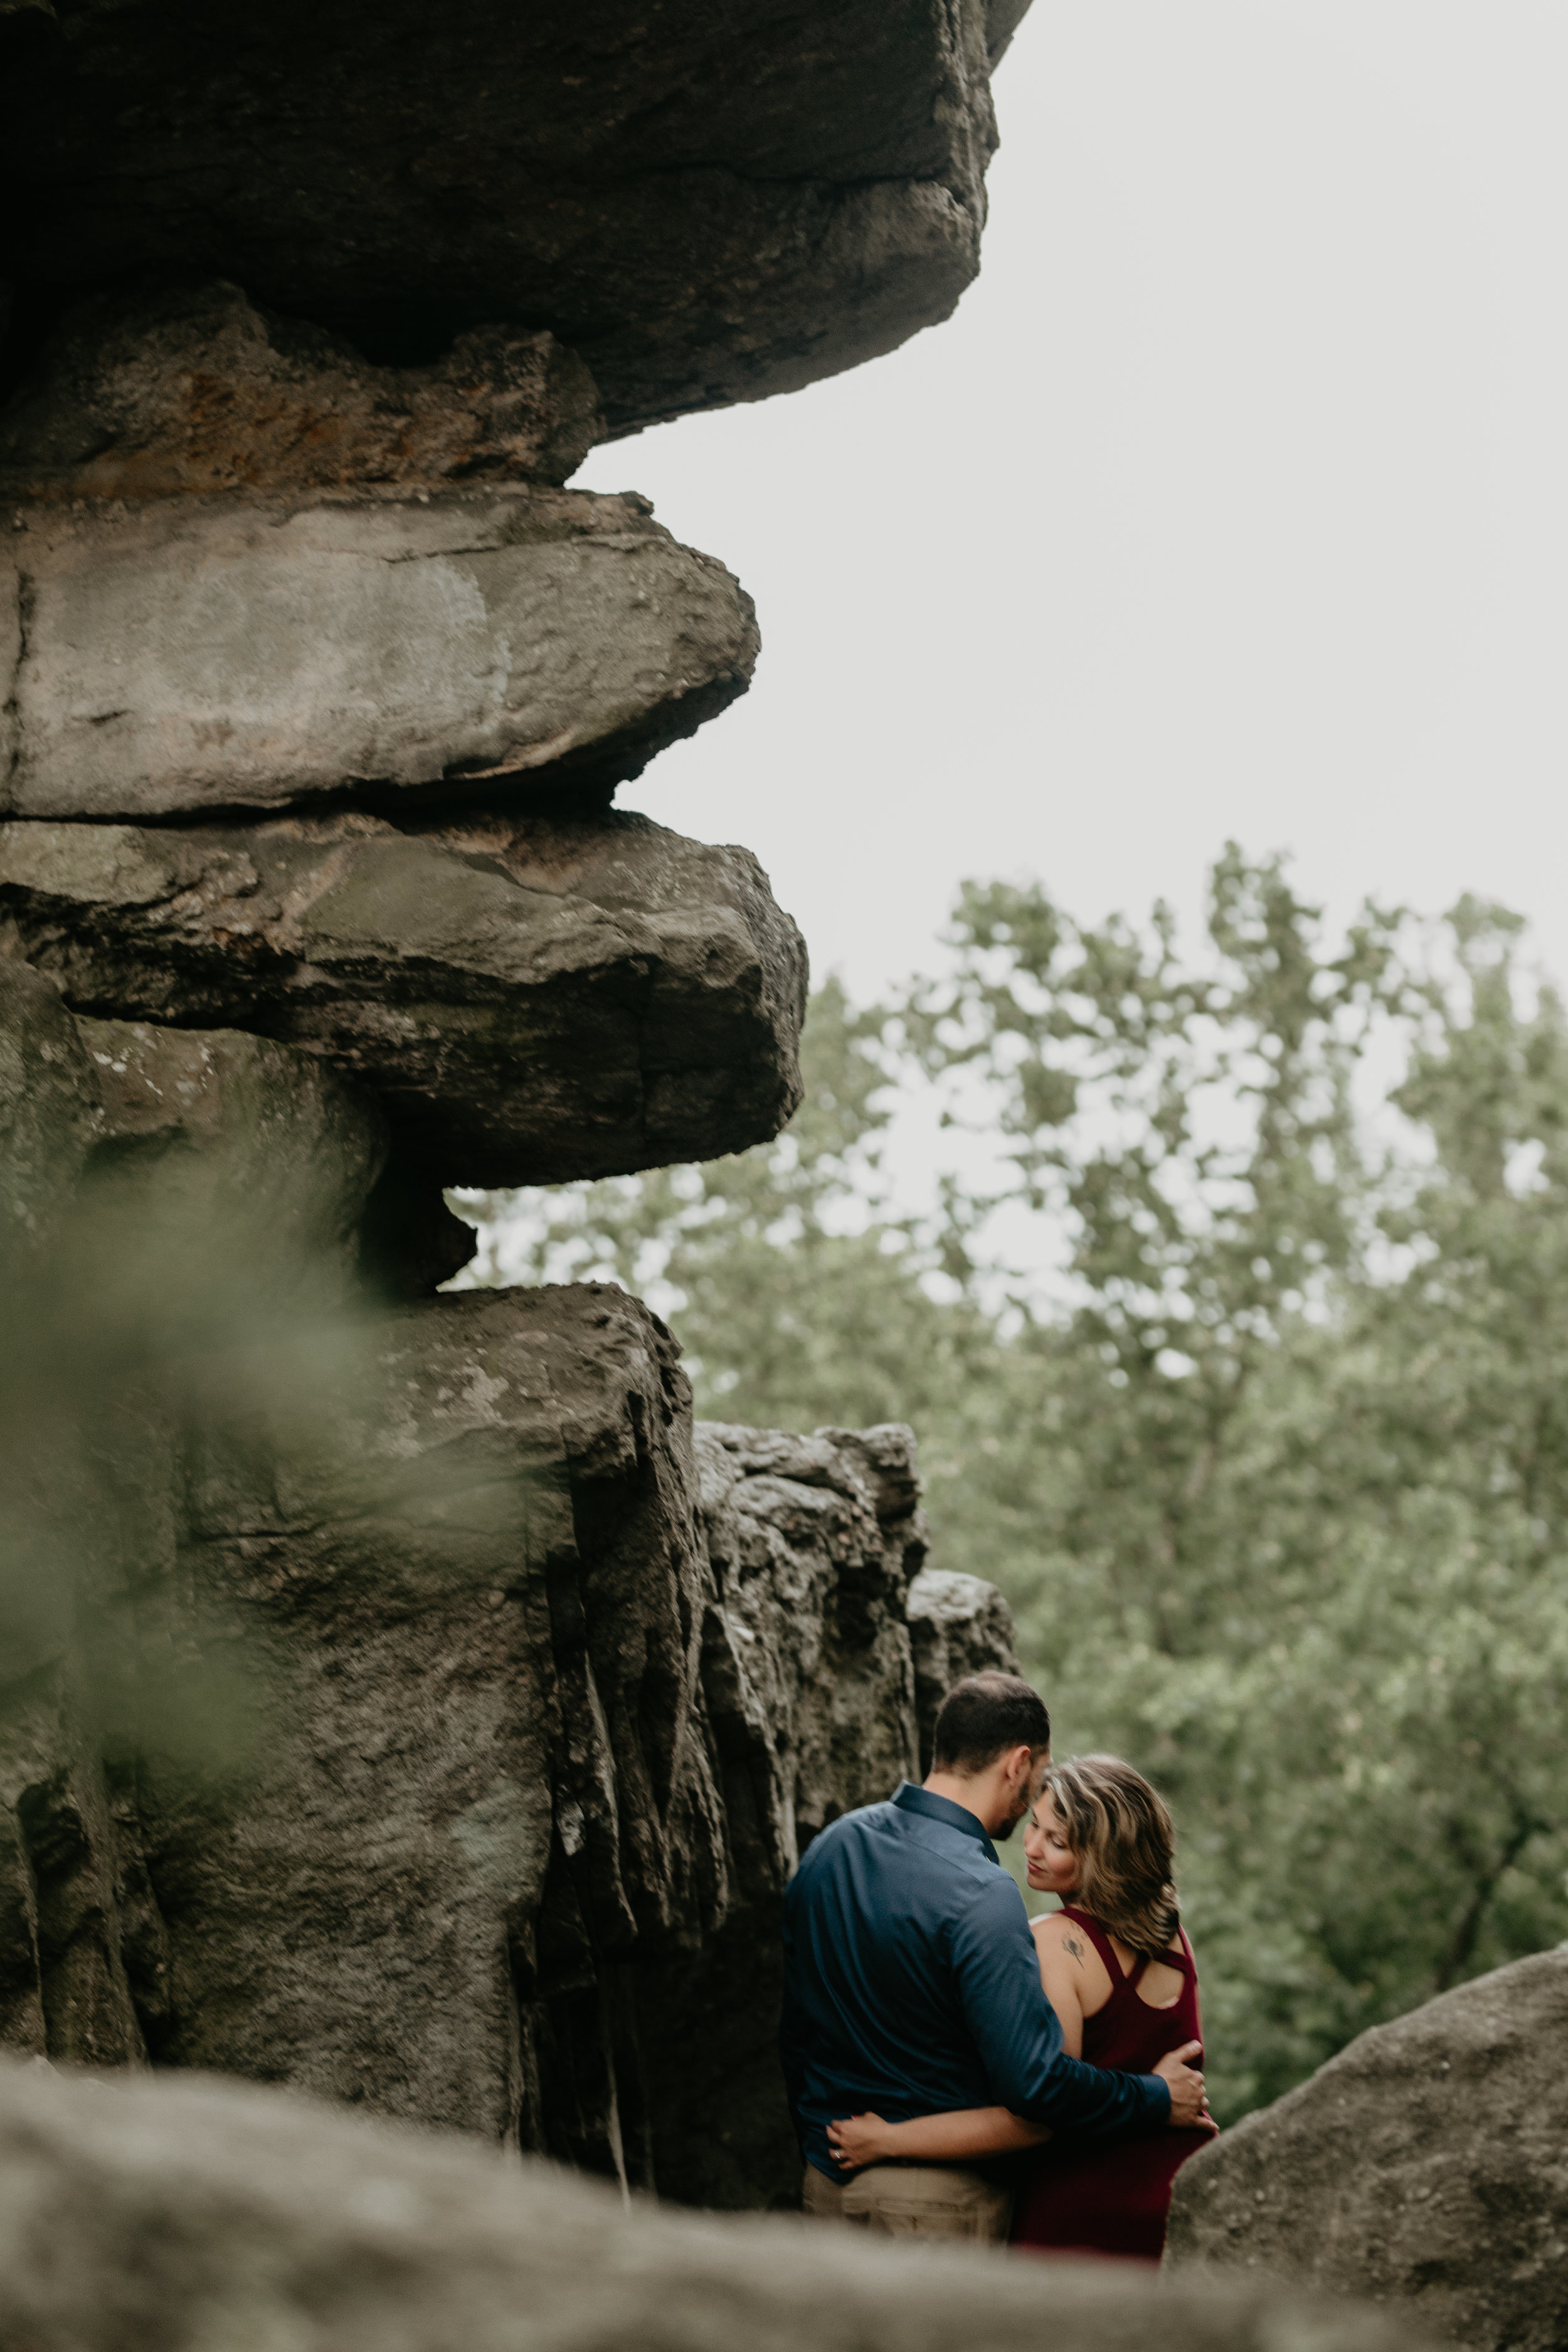 Nicole-Daacke-Photography-rock-state-park-overlook-king-queen-seat-maryland-hiking-adventure-engagement-session-photos-portraits-summer-bel-air-dog-engagement-session-38.jpg